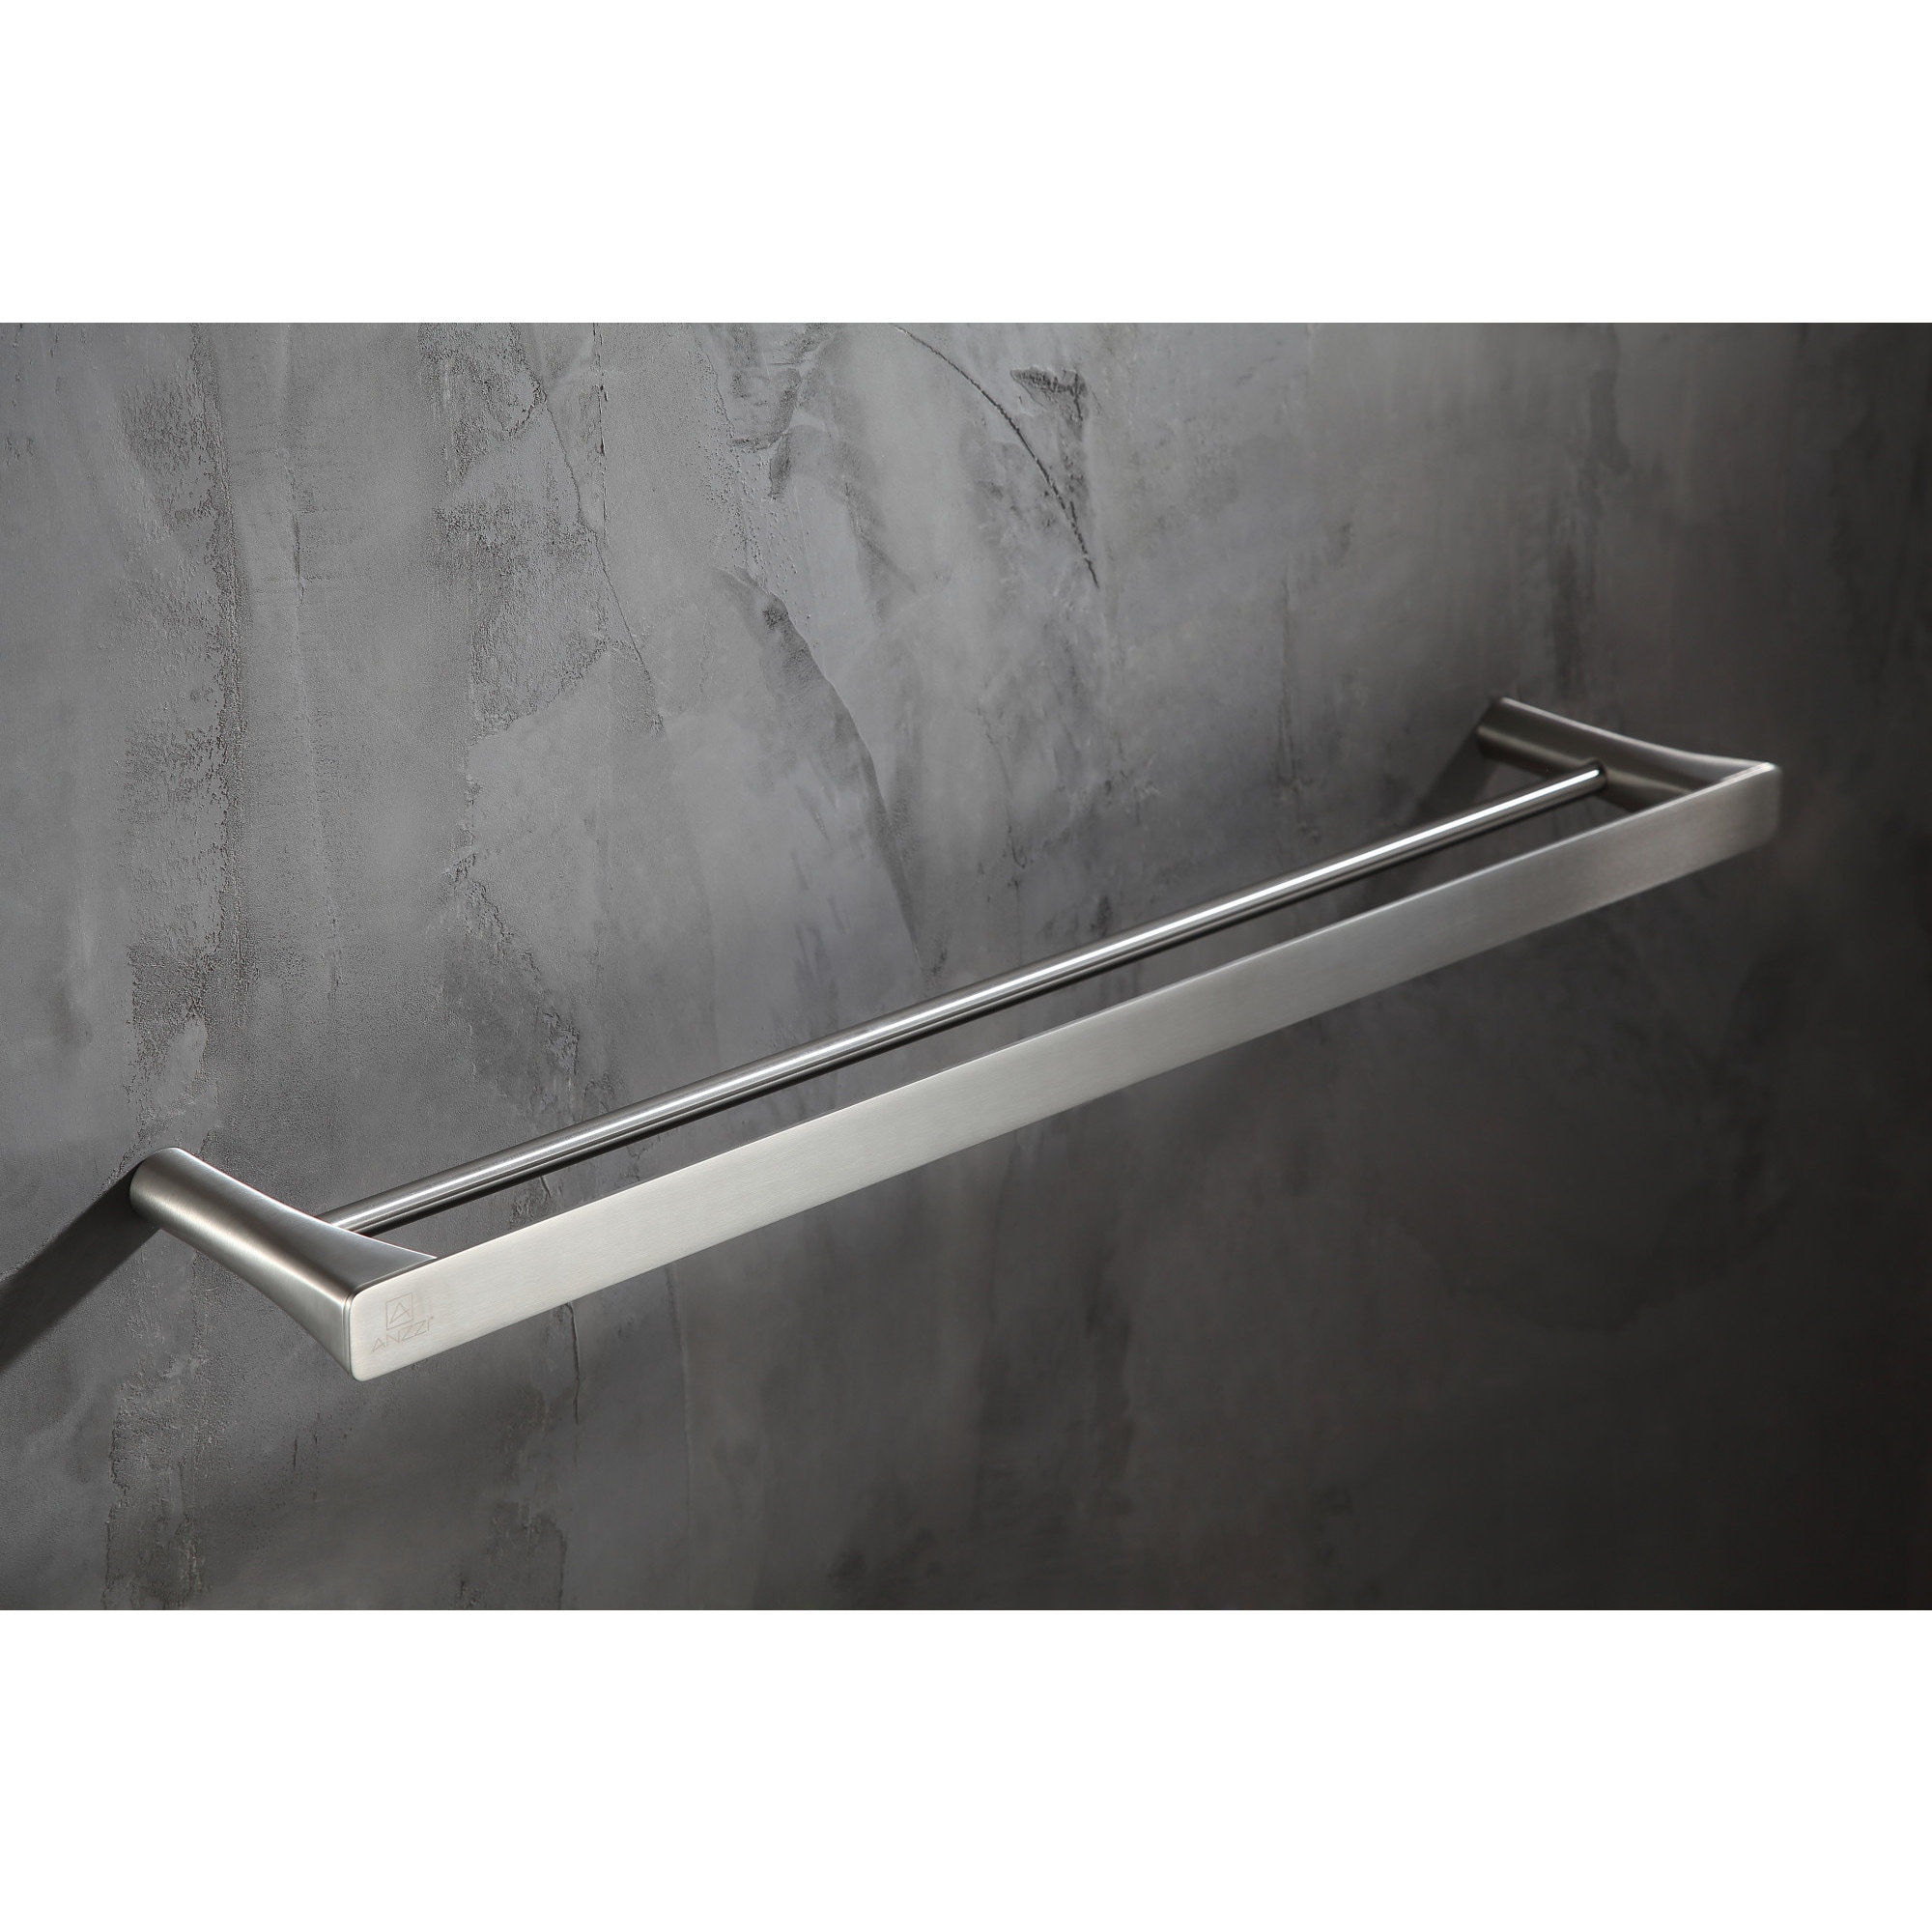 ANZZI Caster 3 Series Towel Bar in Brushed Nickel - Bed Bath & Beyond -  16807824